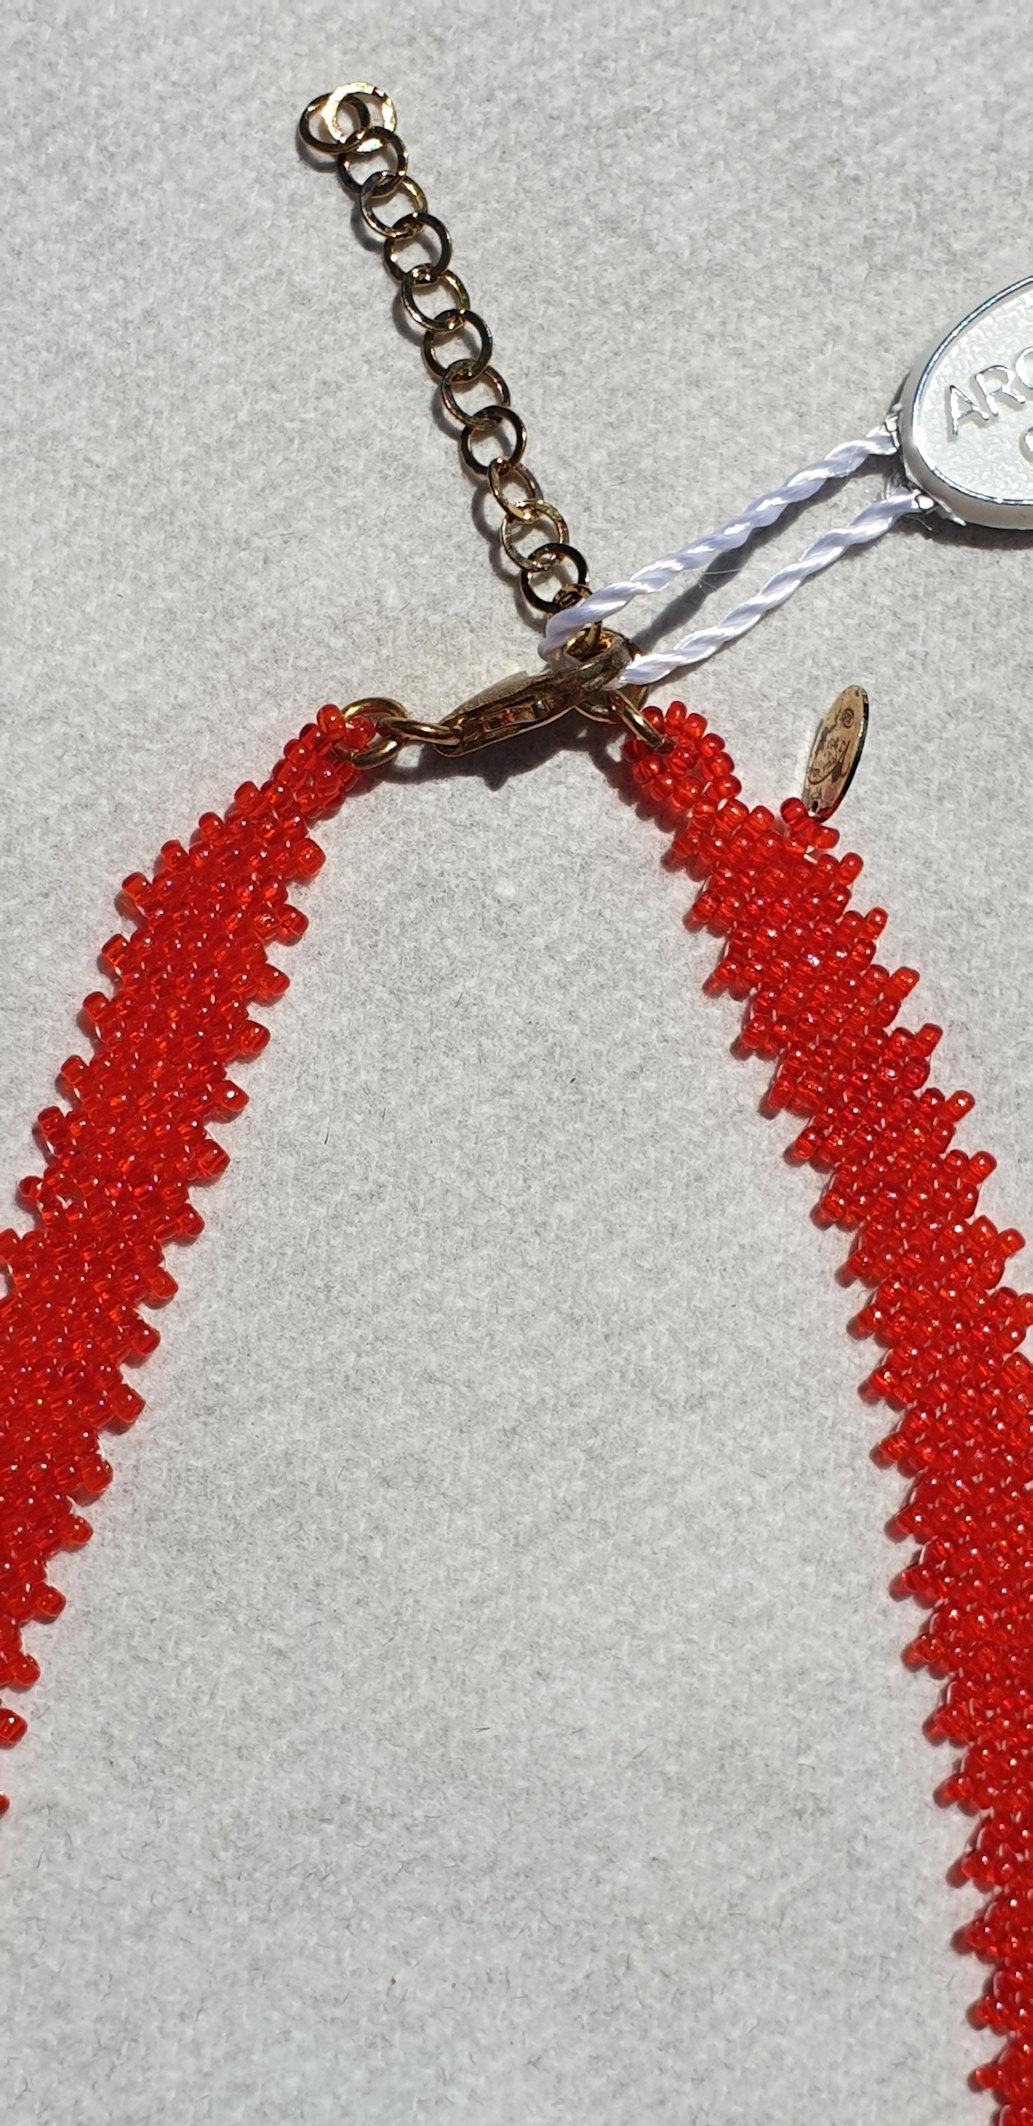 Women's Murano glass beads handmade red coral necklace by Italian artist Paola B.